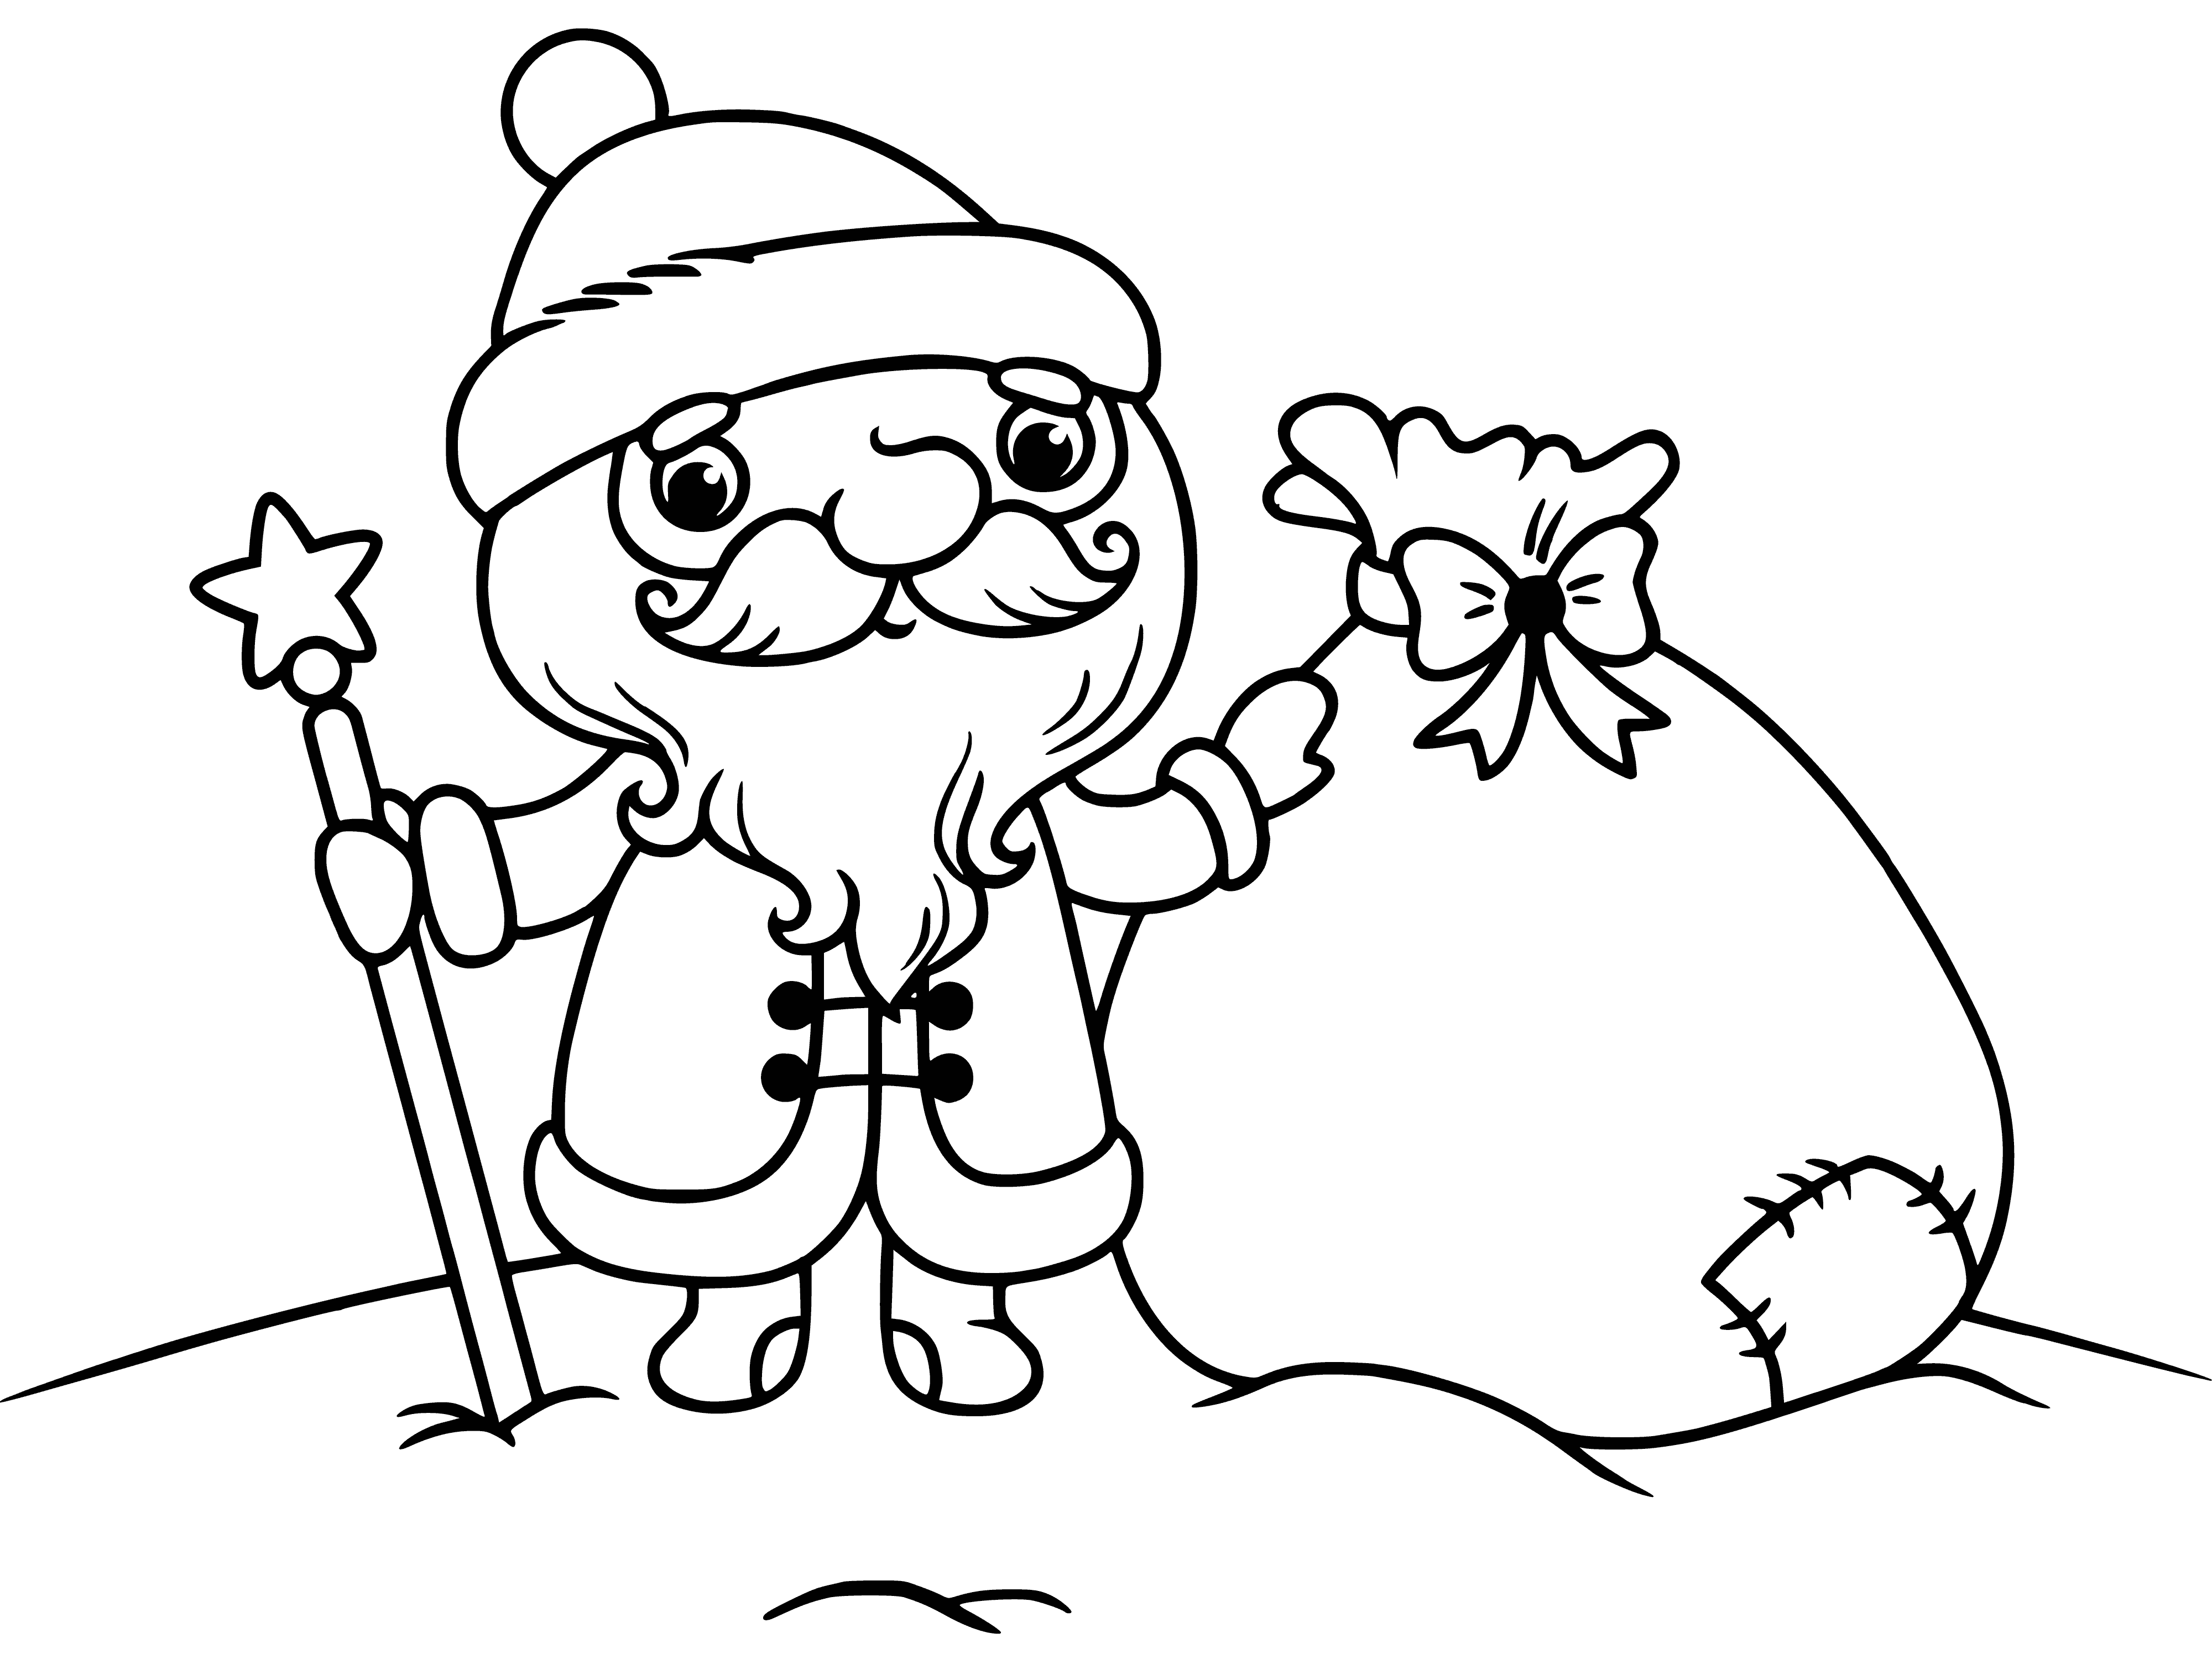 coloring page: Jolly man in red suit w/ white beard, red hat w/ white puff, holding presents & shaking belly like bowl full of jelly when he laughs.